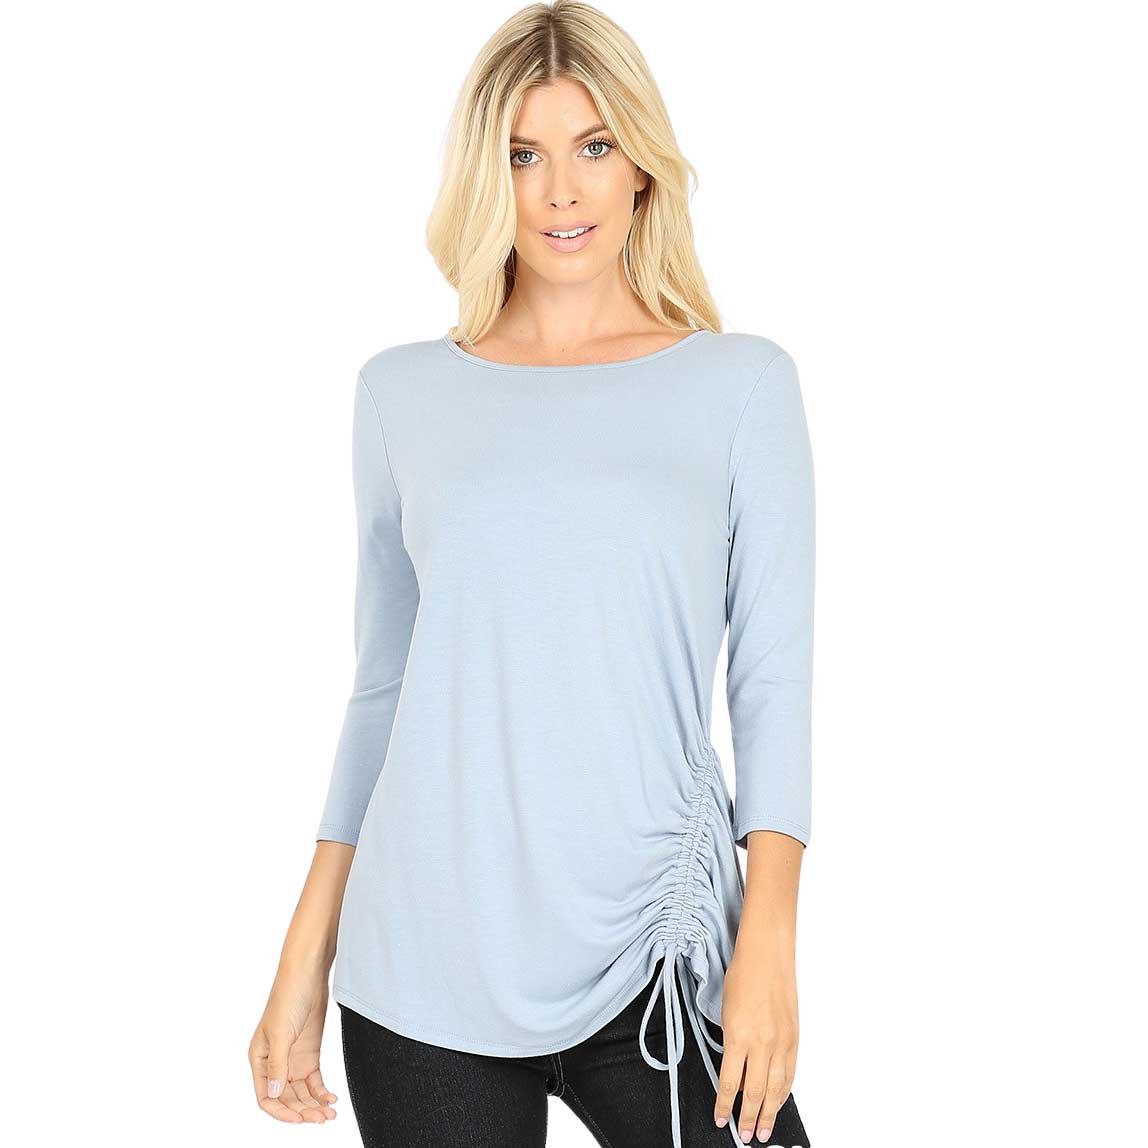 1887 - 3/4 Sleeve Ruched Tops ASH BLUE 3/4 Sleeve Round Neck Side Ruched 1887 - Medium